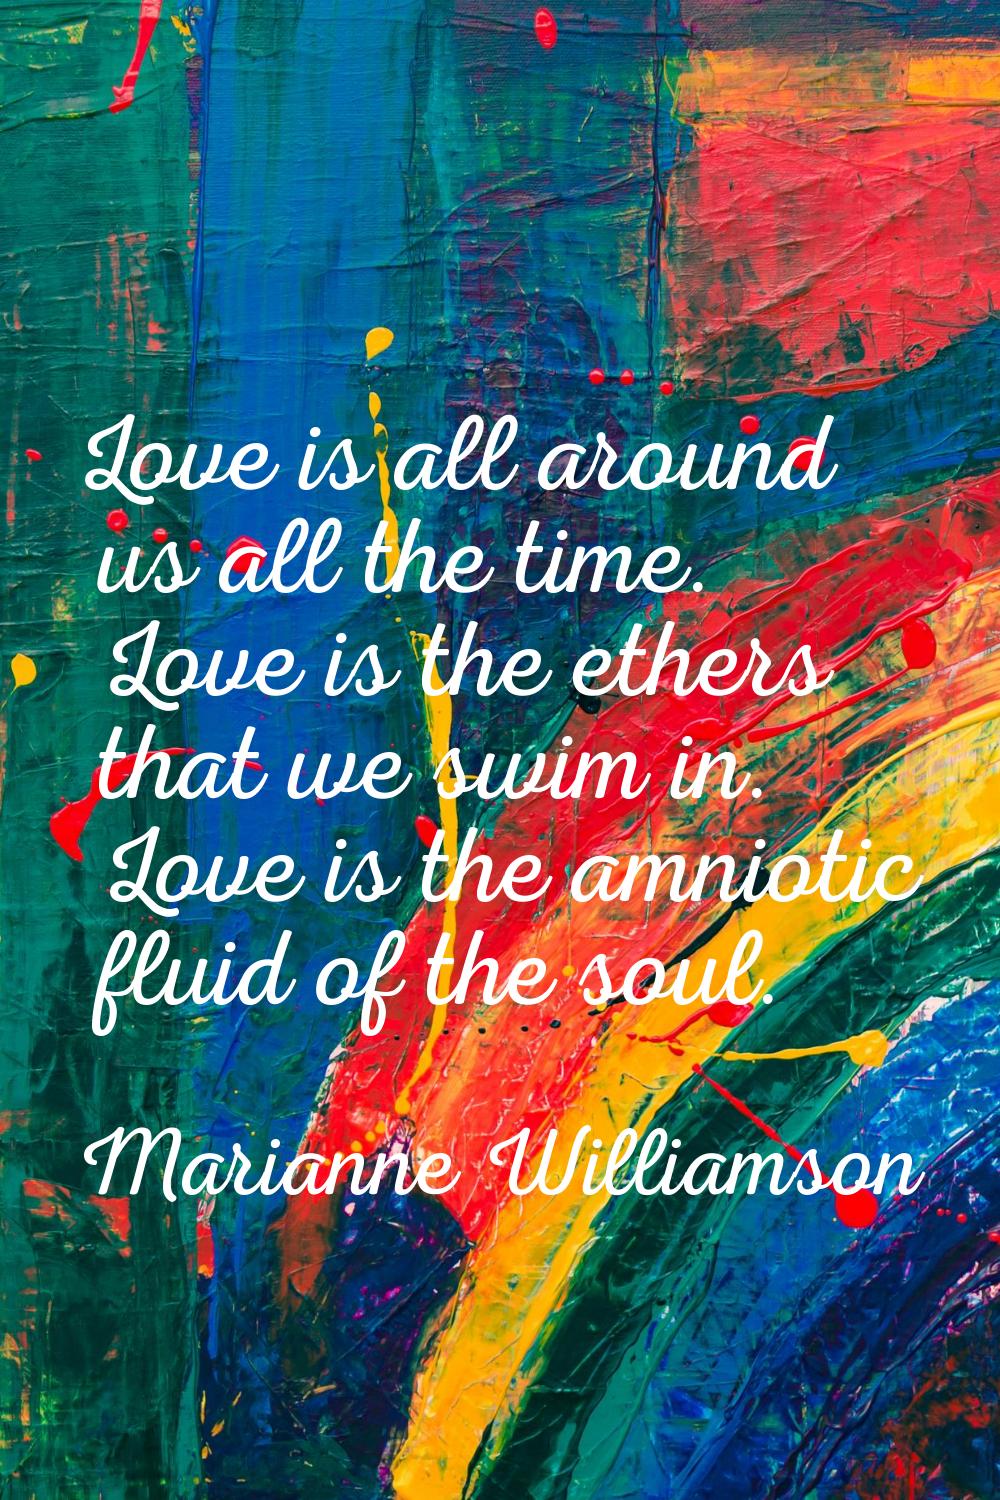 Love is all around us all the time. Love is the ethers that we swim in. Love is the amniotic fluid 